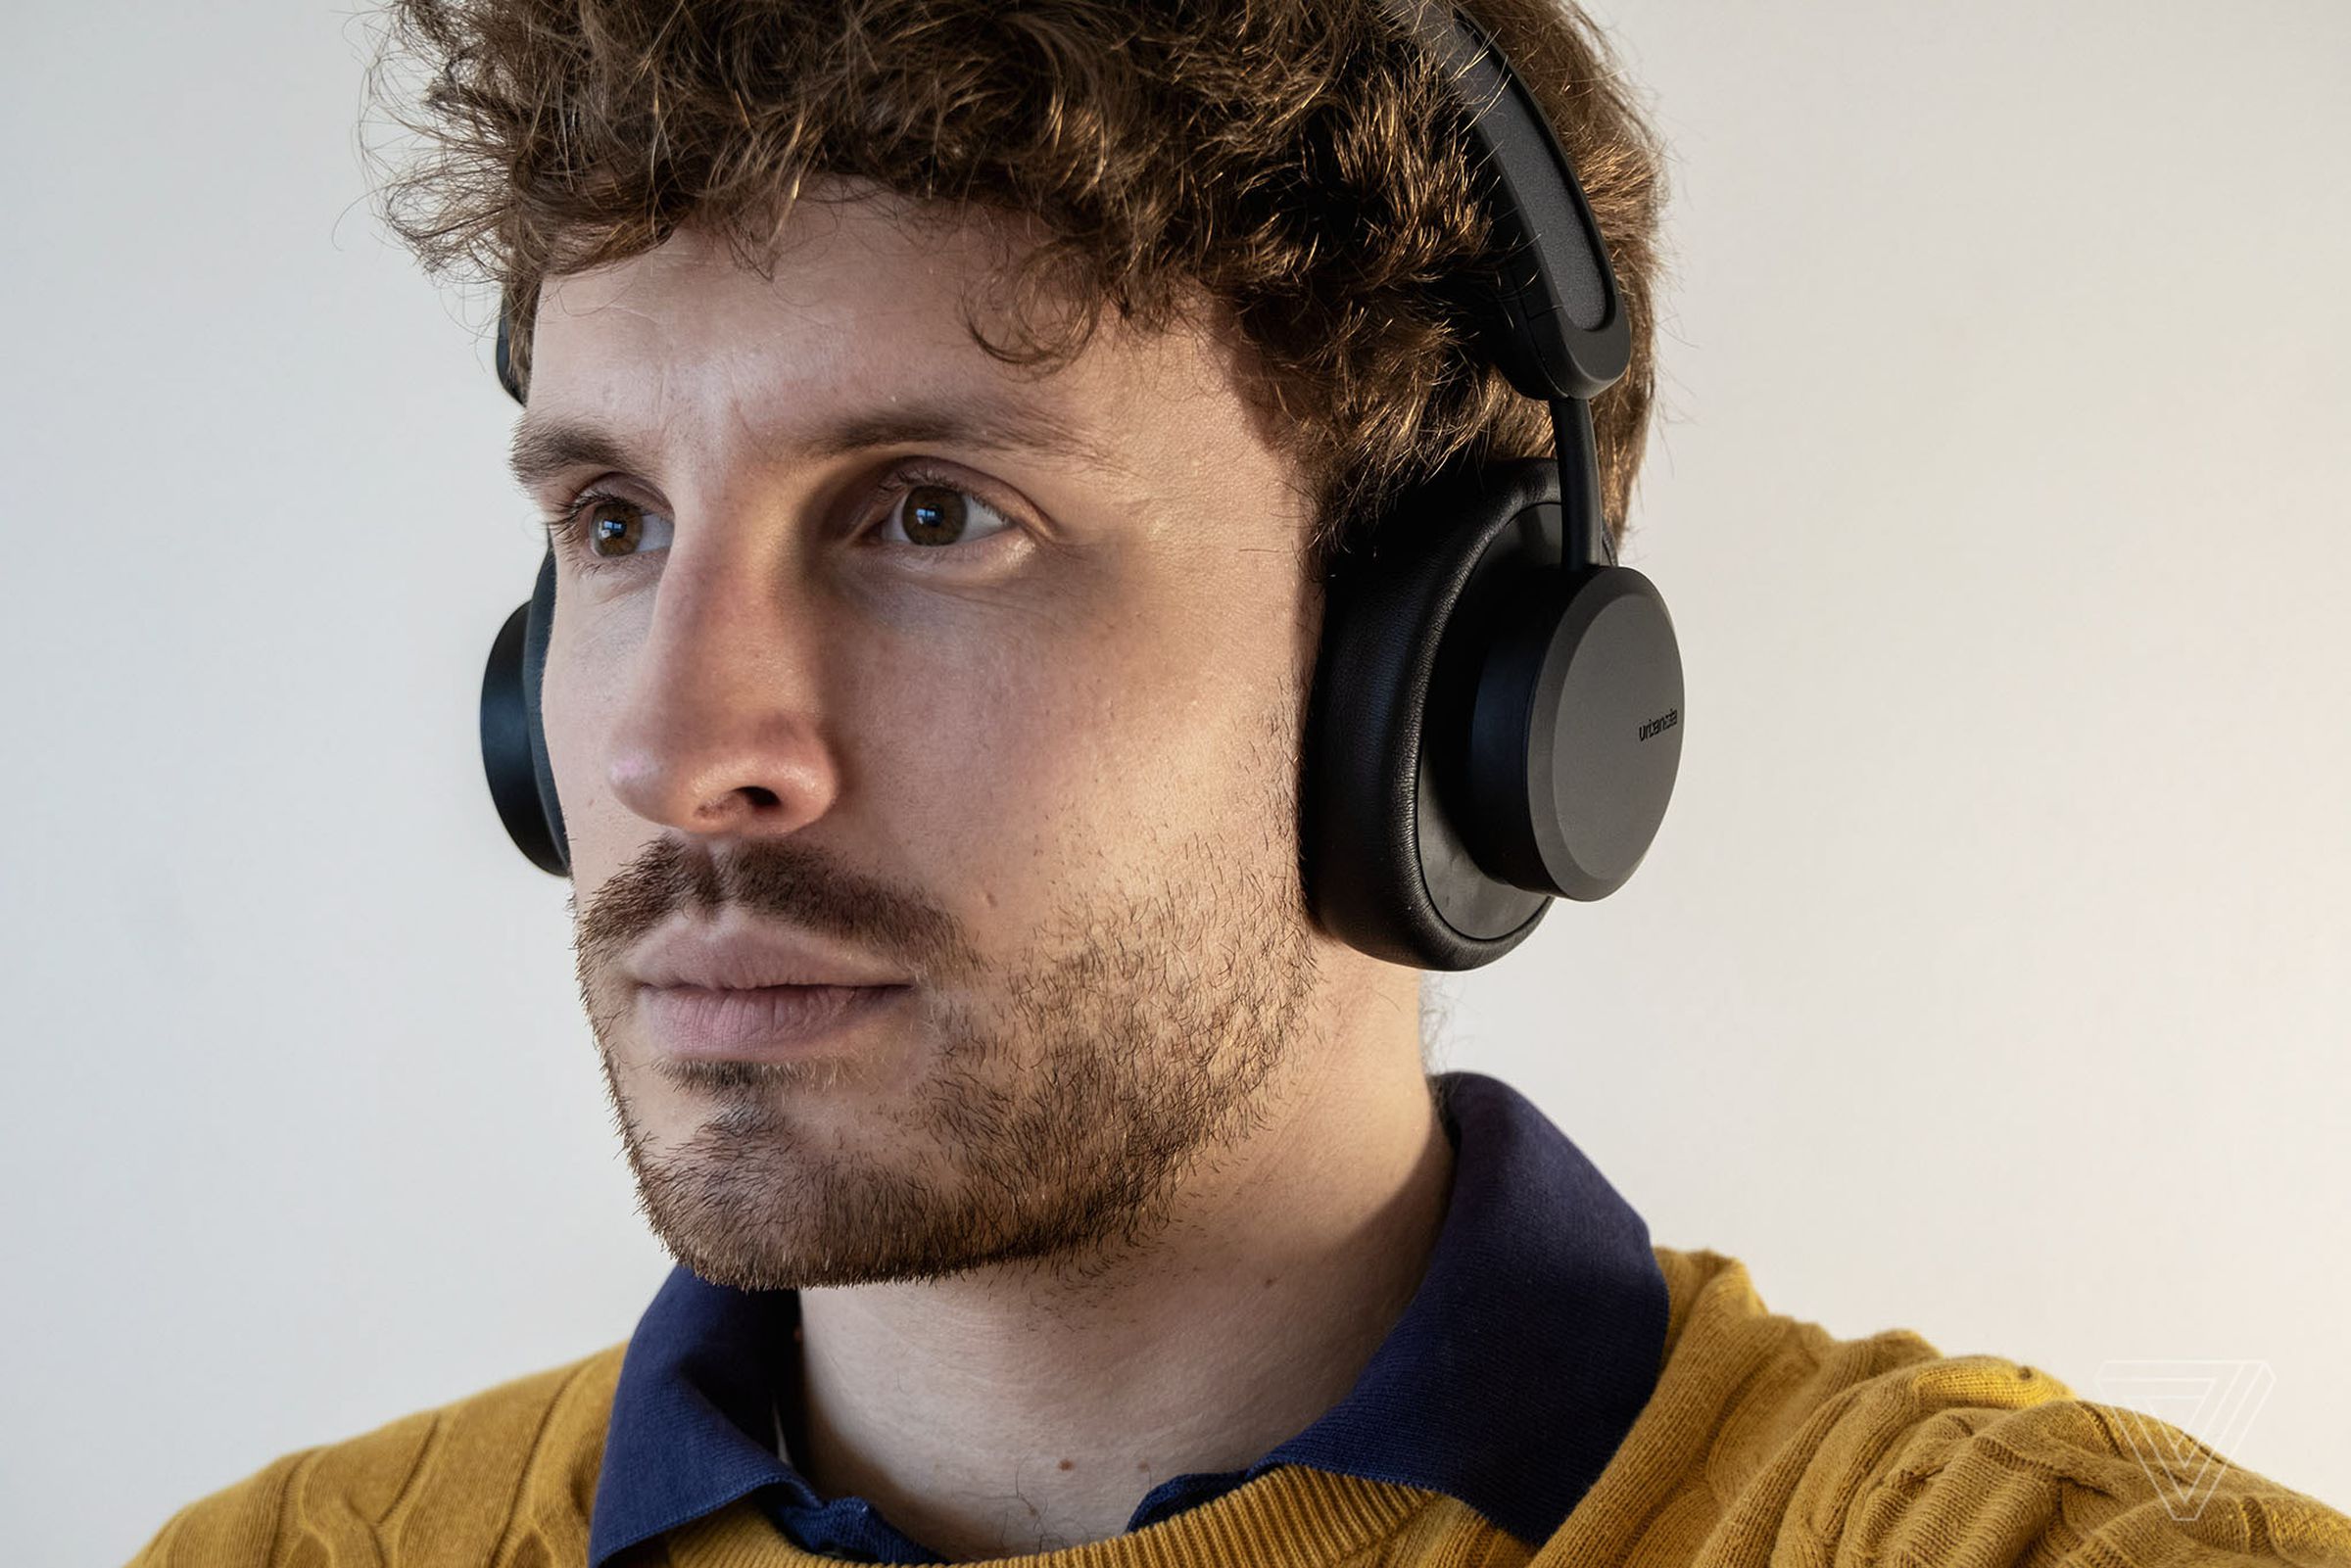 The headphones can be snug on larger heads.